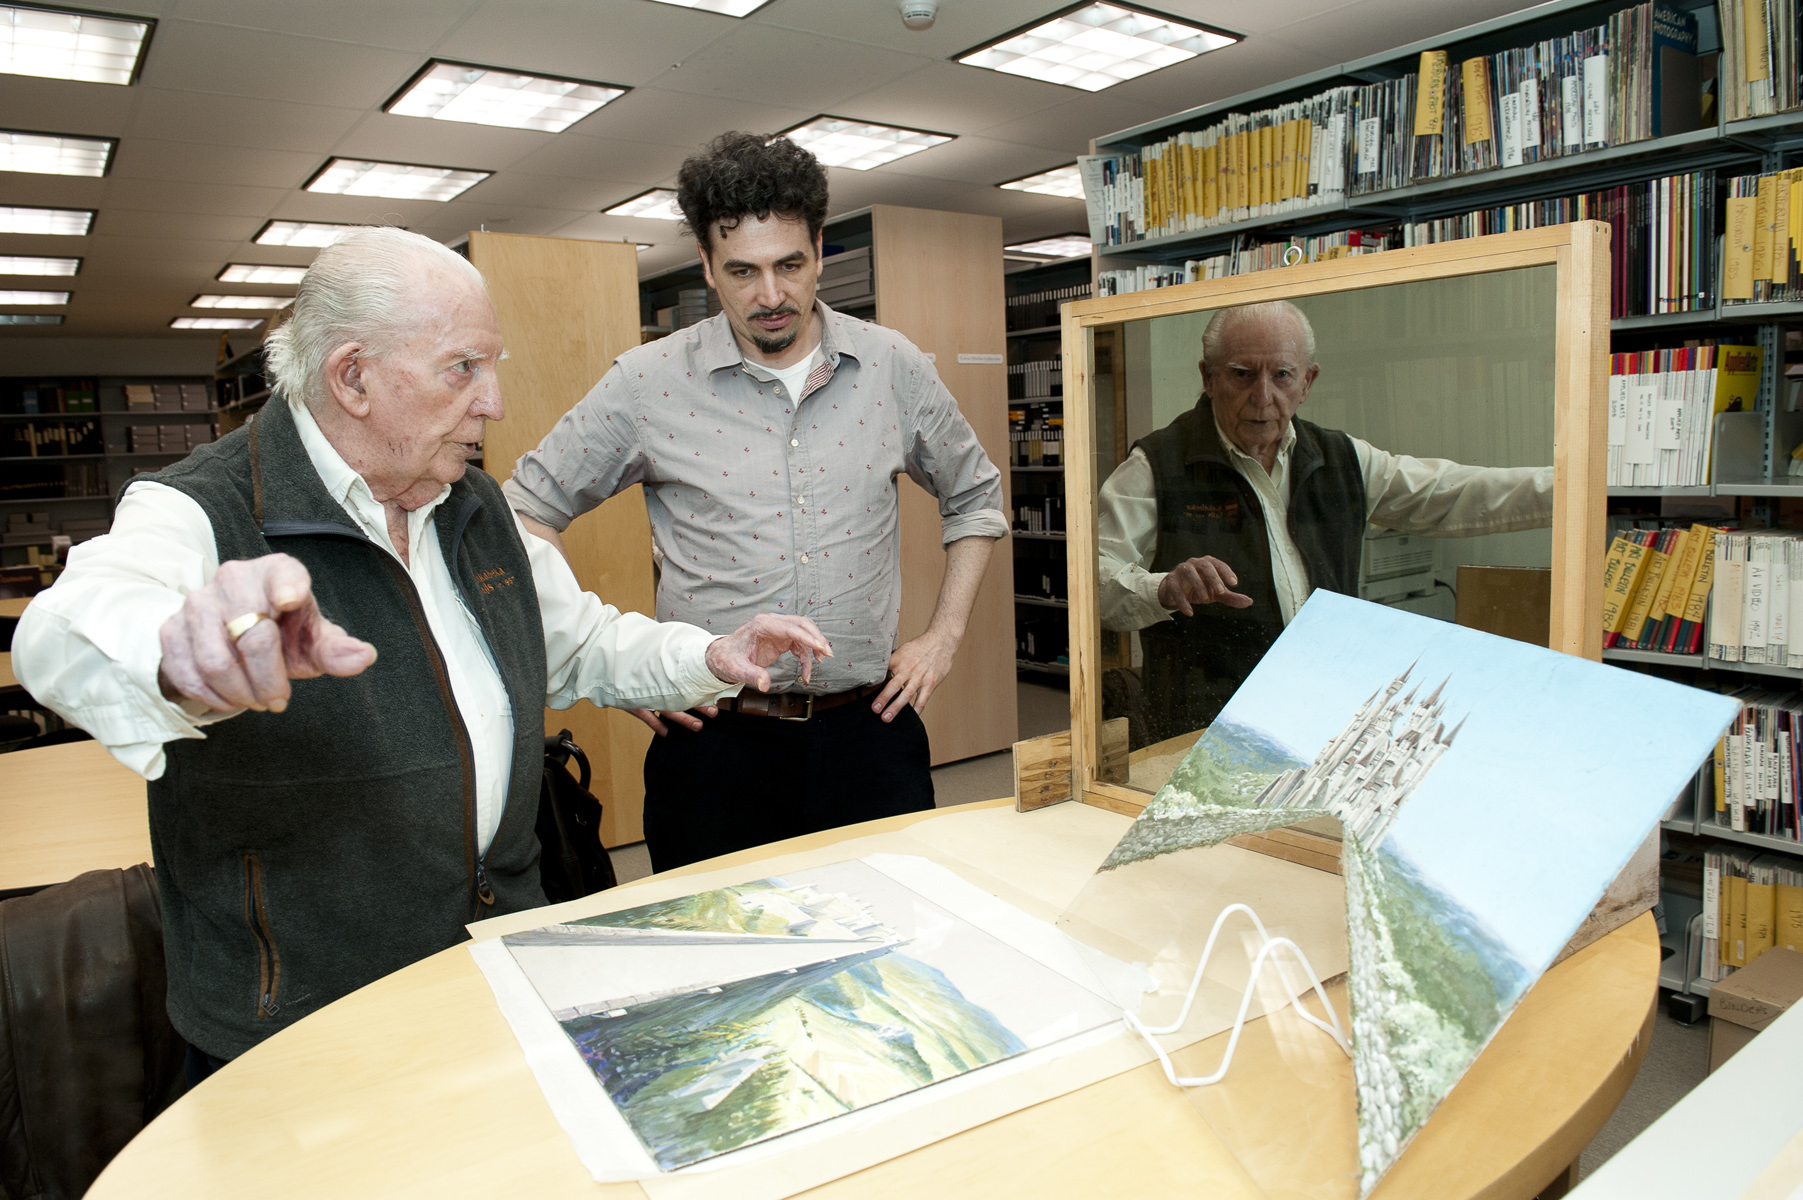 Pictured is Hackborn visiting the Ryerson Library and Archives on March 7, 2013 with archivist Curtis Sassur. Hackborn explains the technique behind the matte glass. (Photograph by Dave Upham, University photographer)